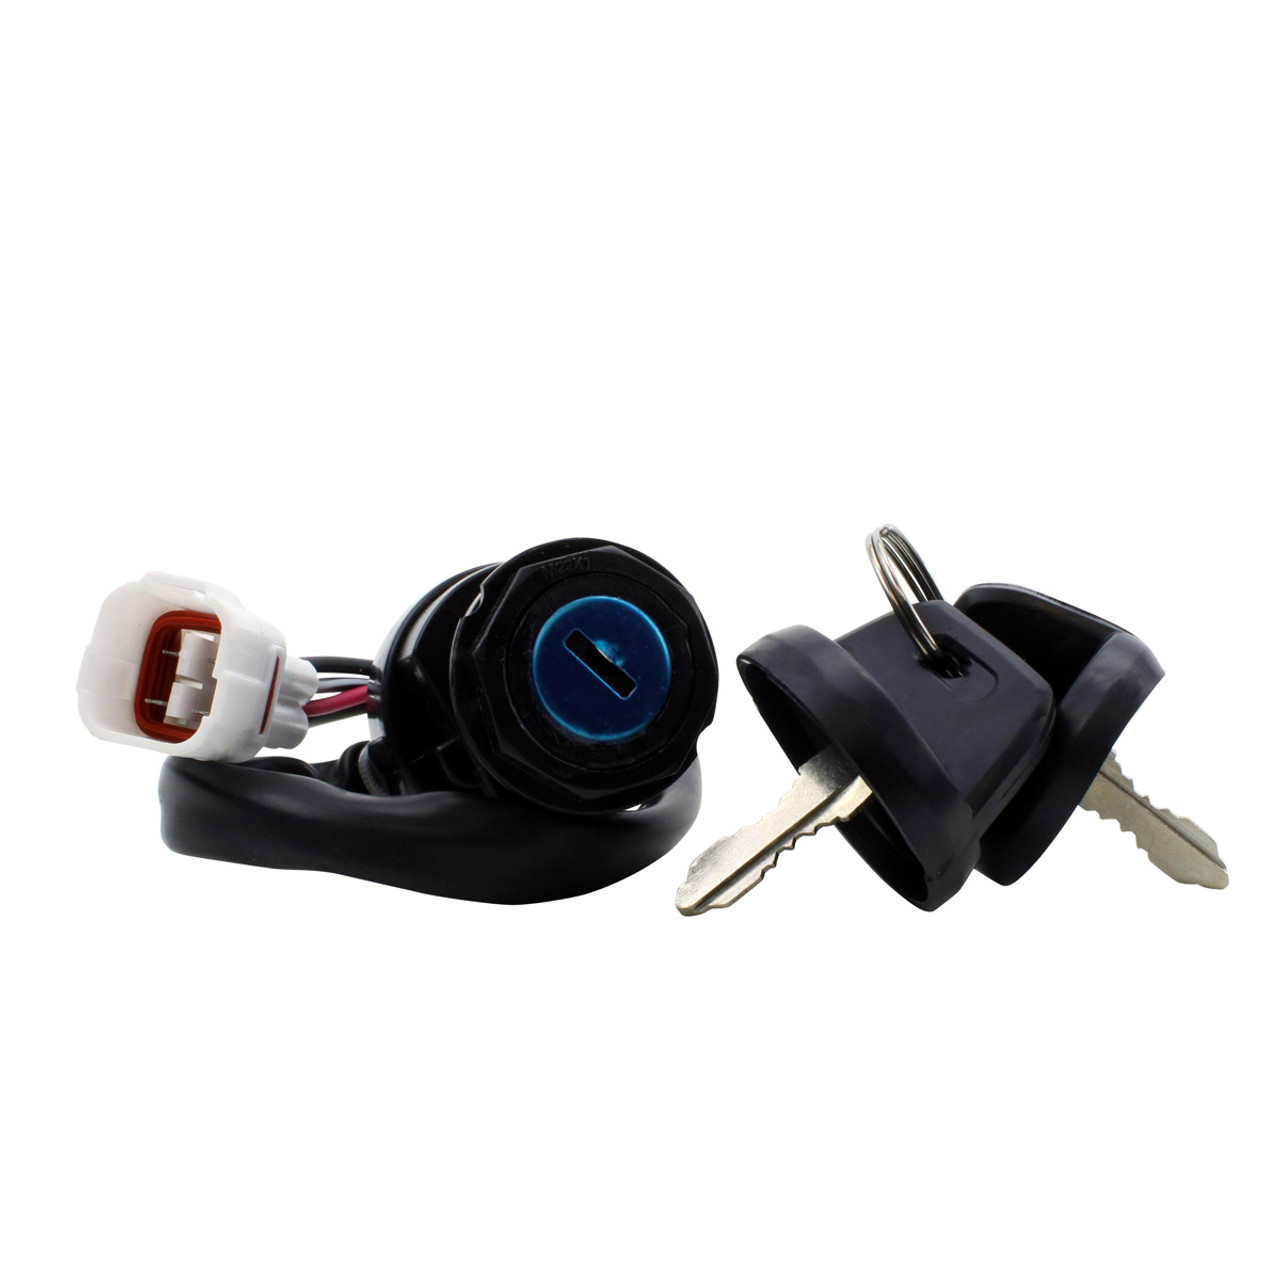 RMSTATOR New Aftermarket Yamaha 2-Position Ignition Key Switch, RM05001